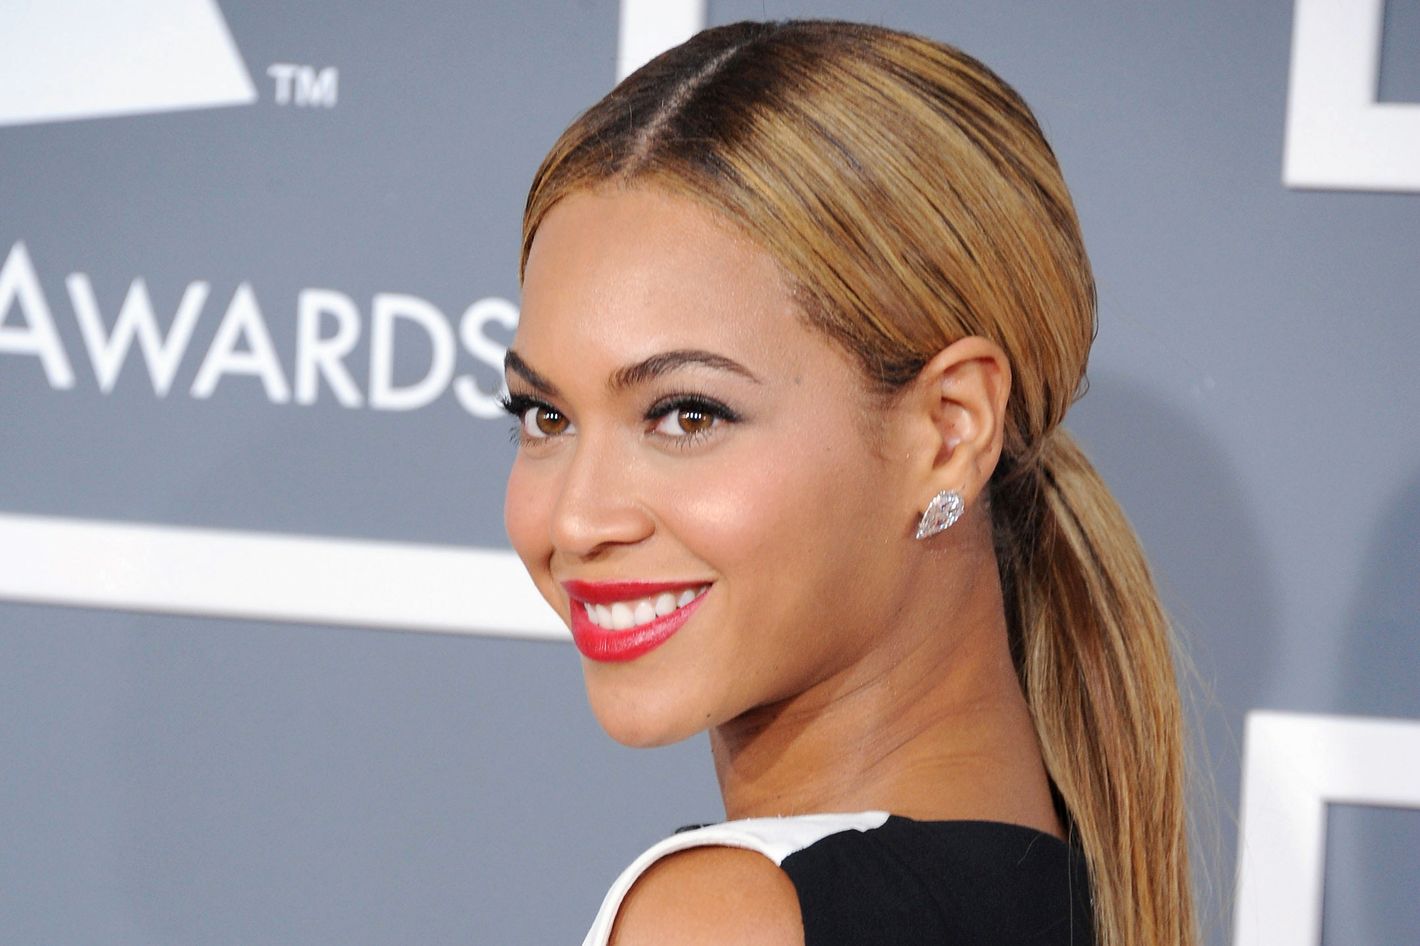 Beyonce is 'Crazy in Love' on 'Fifty Shades of Grey' Remix